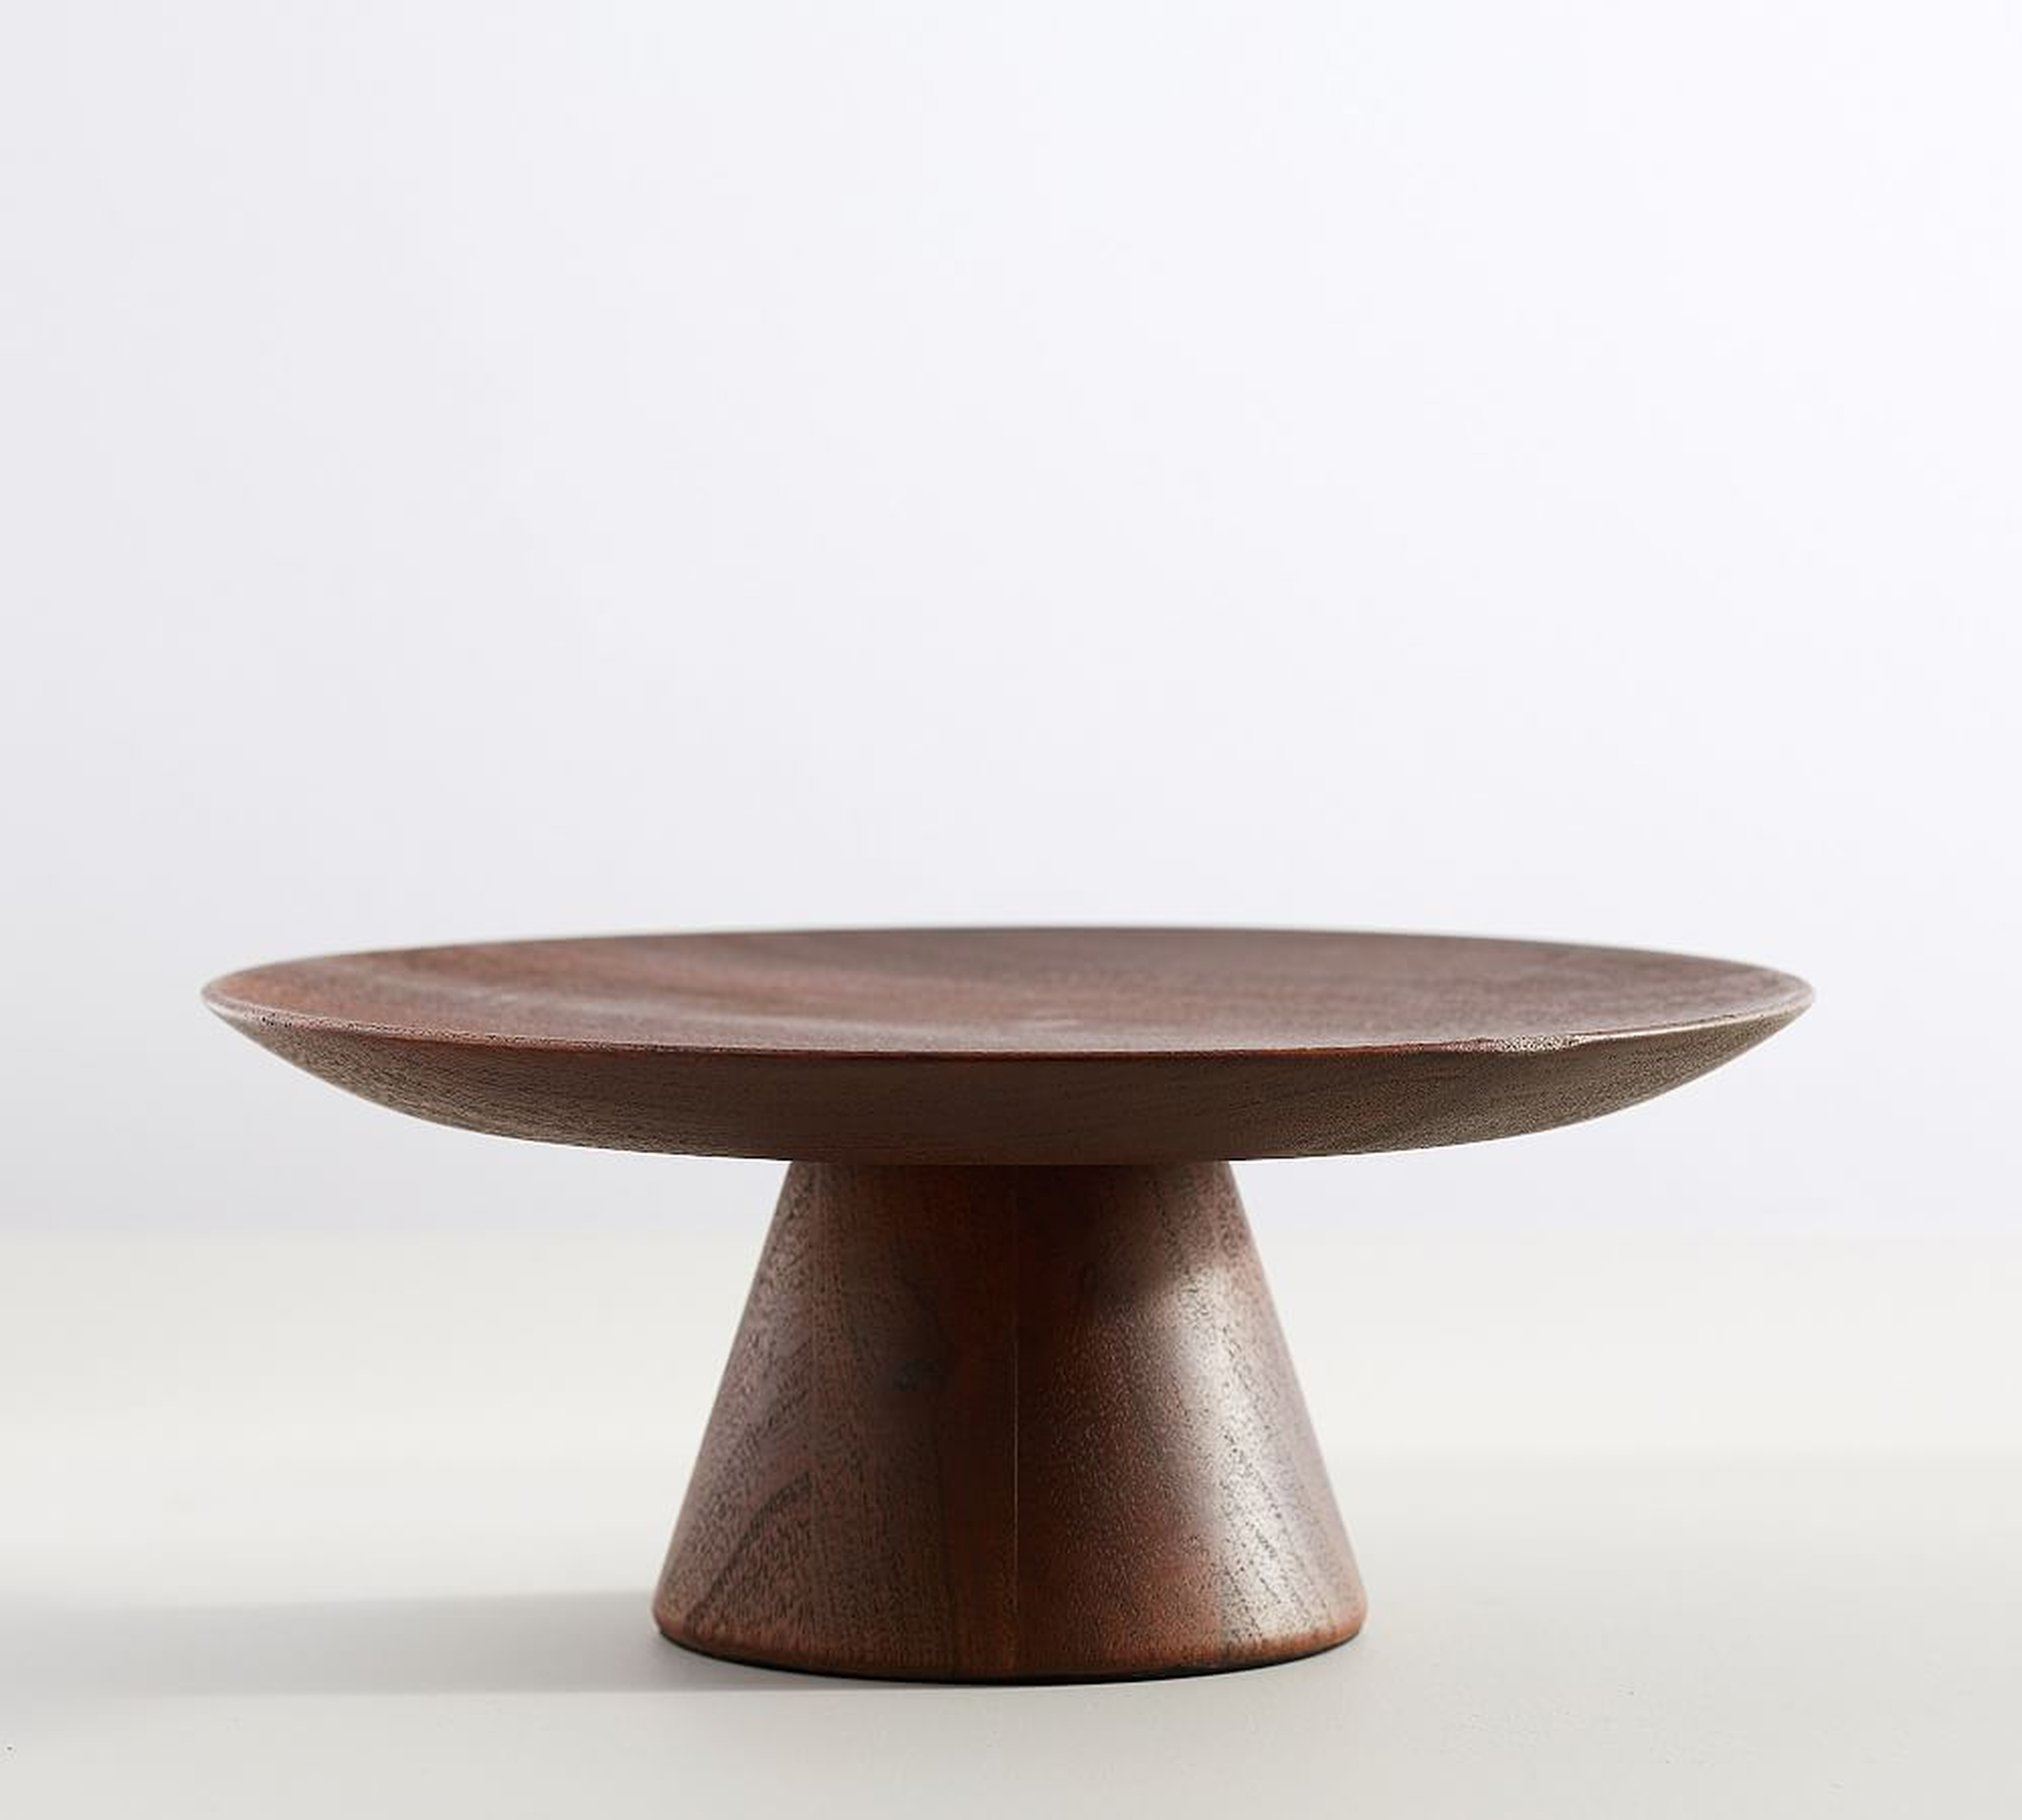 Chateau Wood Cake Stand - Dark Brown - Pottery Barn